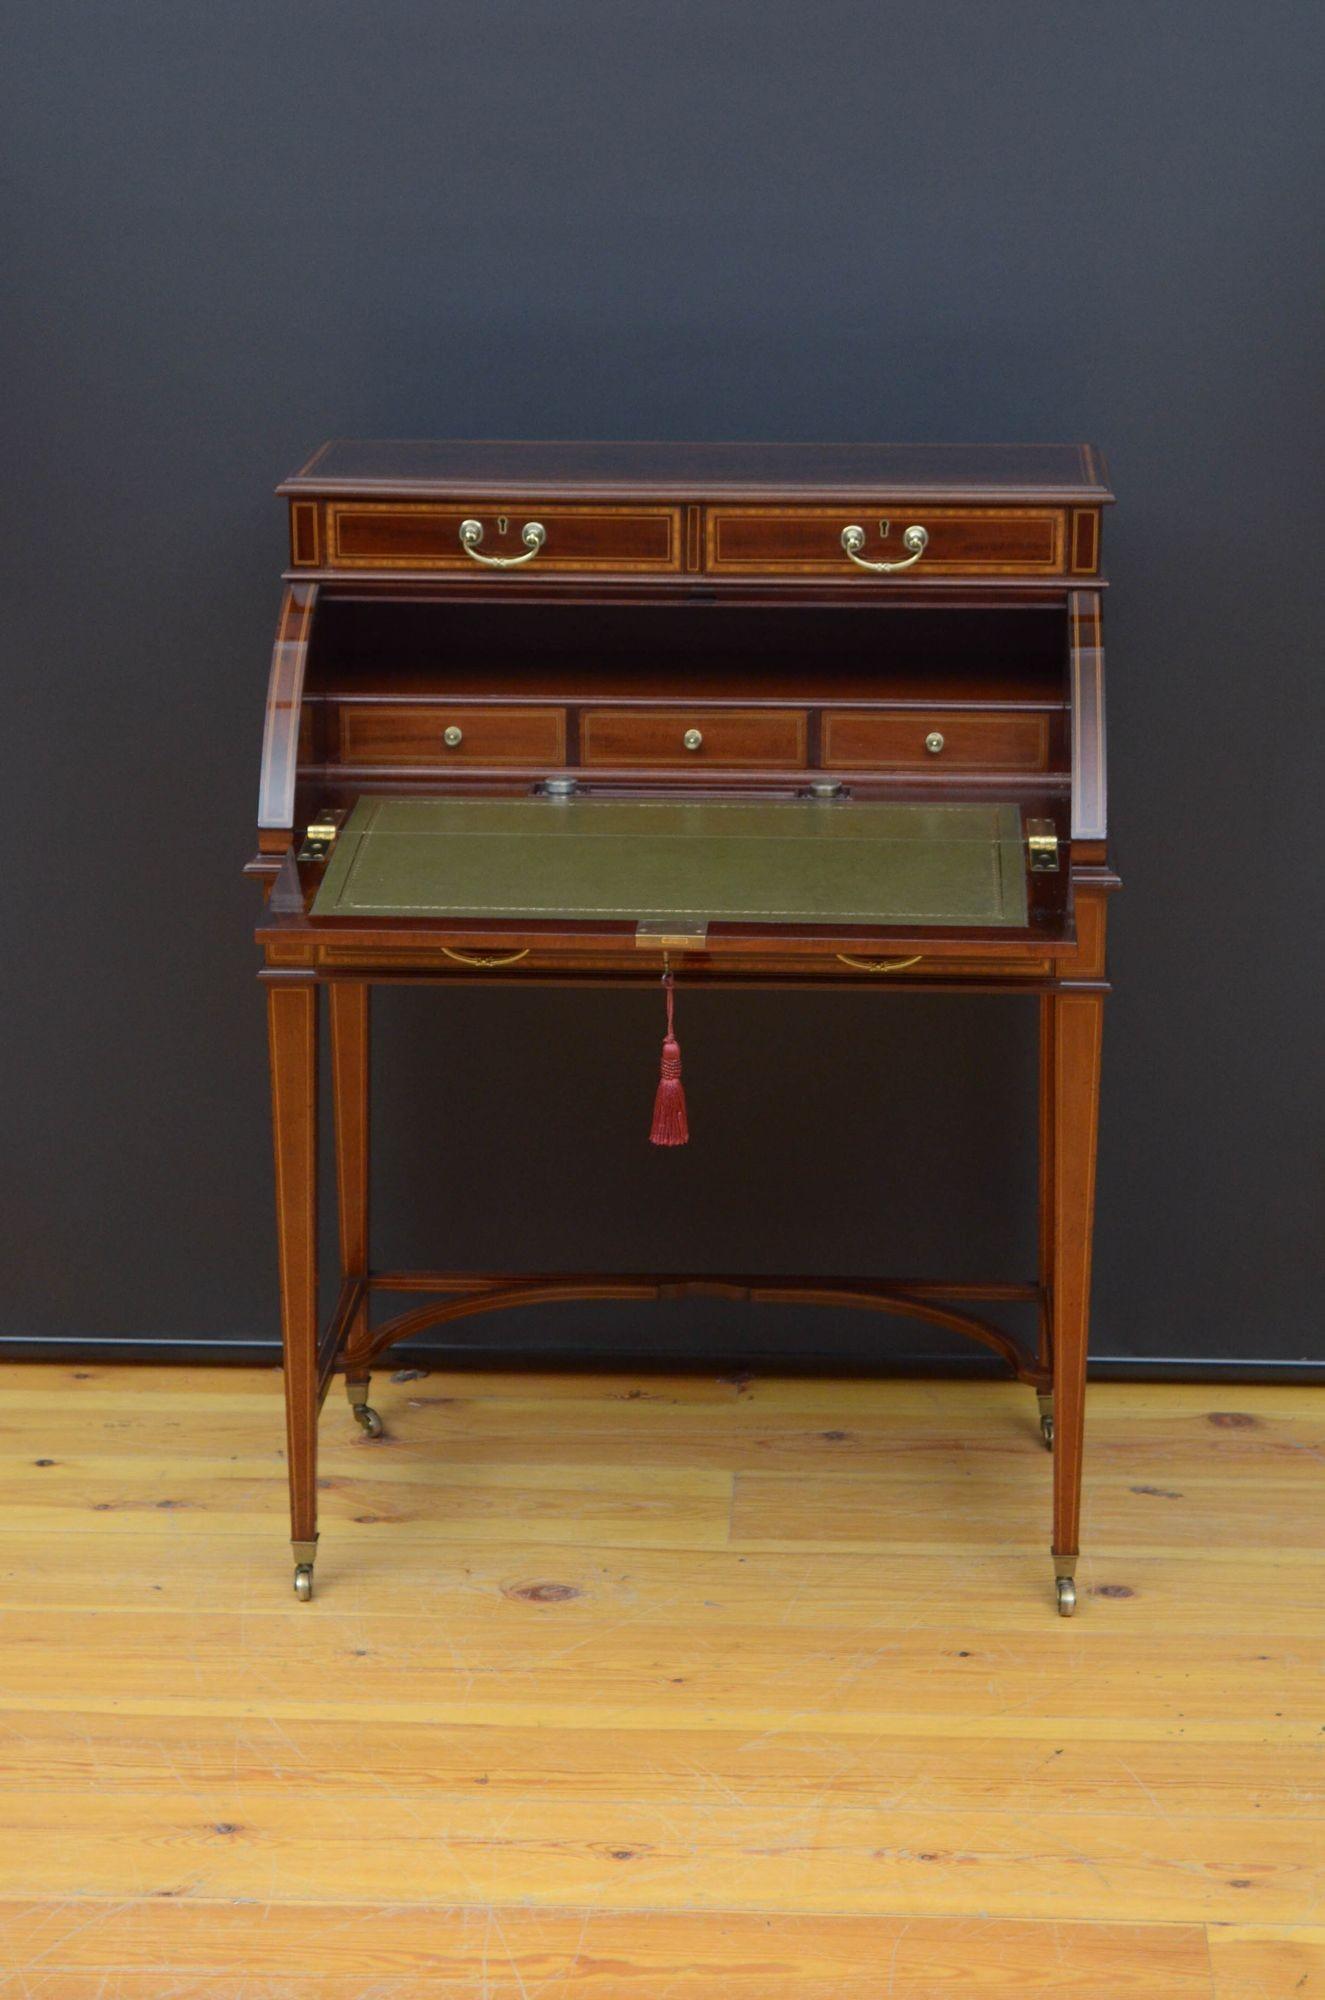 R031 Superb quality and very attractive, Edwardian flamed mahogany cylinder bureau by Maples & Co, two mahogany lined and satinwood crossbanded drawers fitted with original brass handles above a cylinder flamed mahogany front which open to reveal